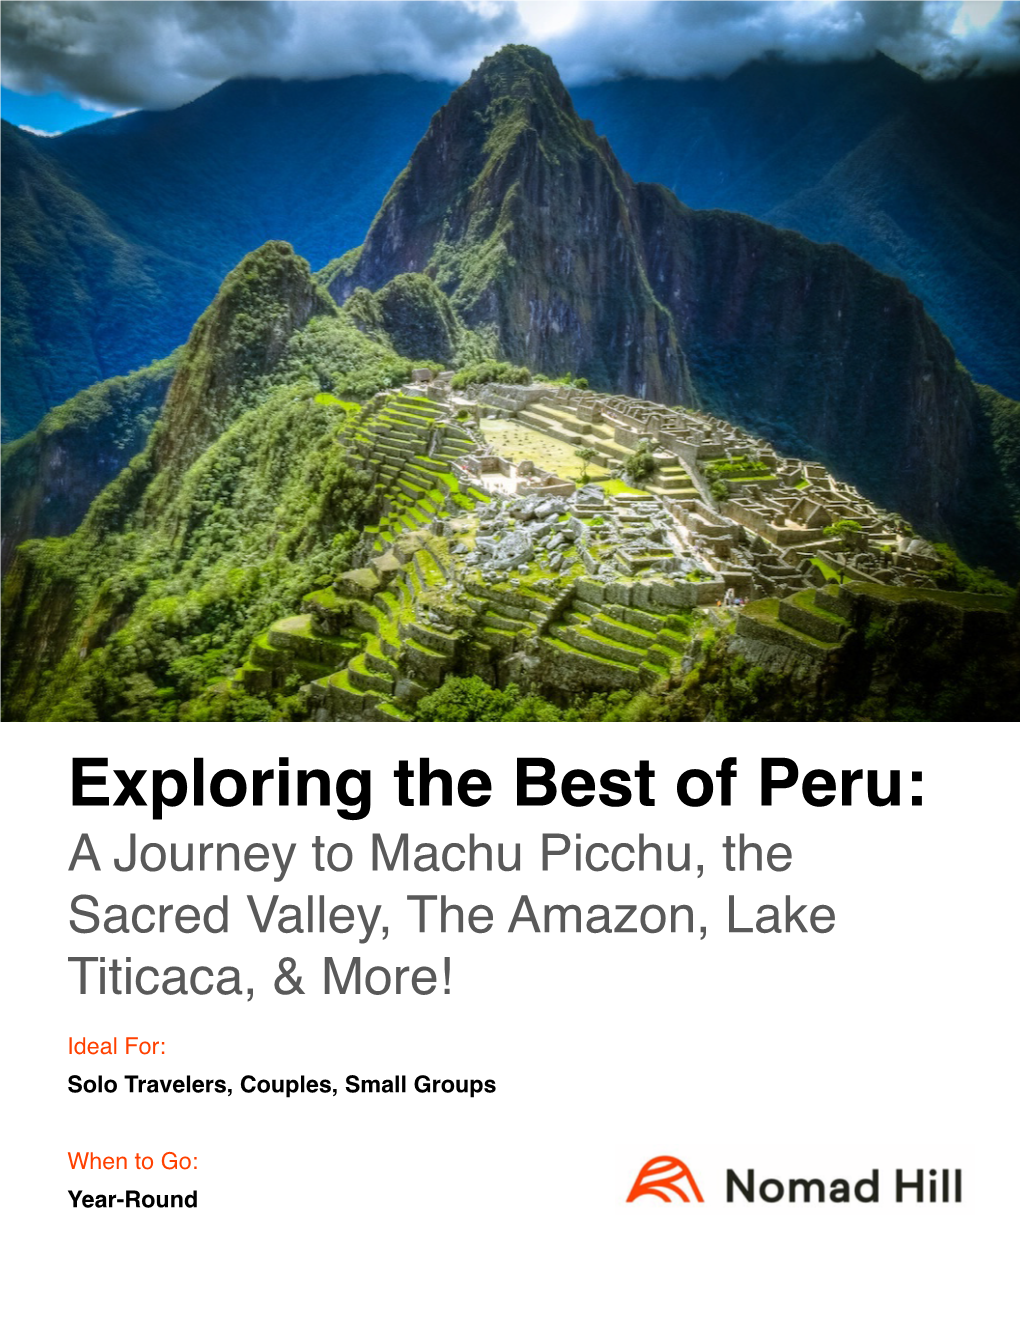 Exploring the Best of Peru: a Journey to Machu Picchu, the Sacred Valley, the Amazon, Lake Titicaca, & More!